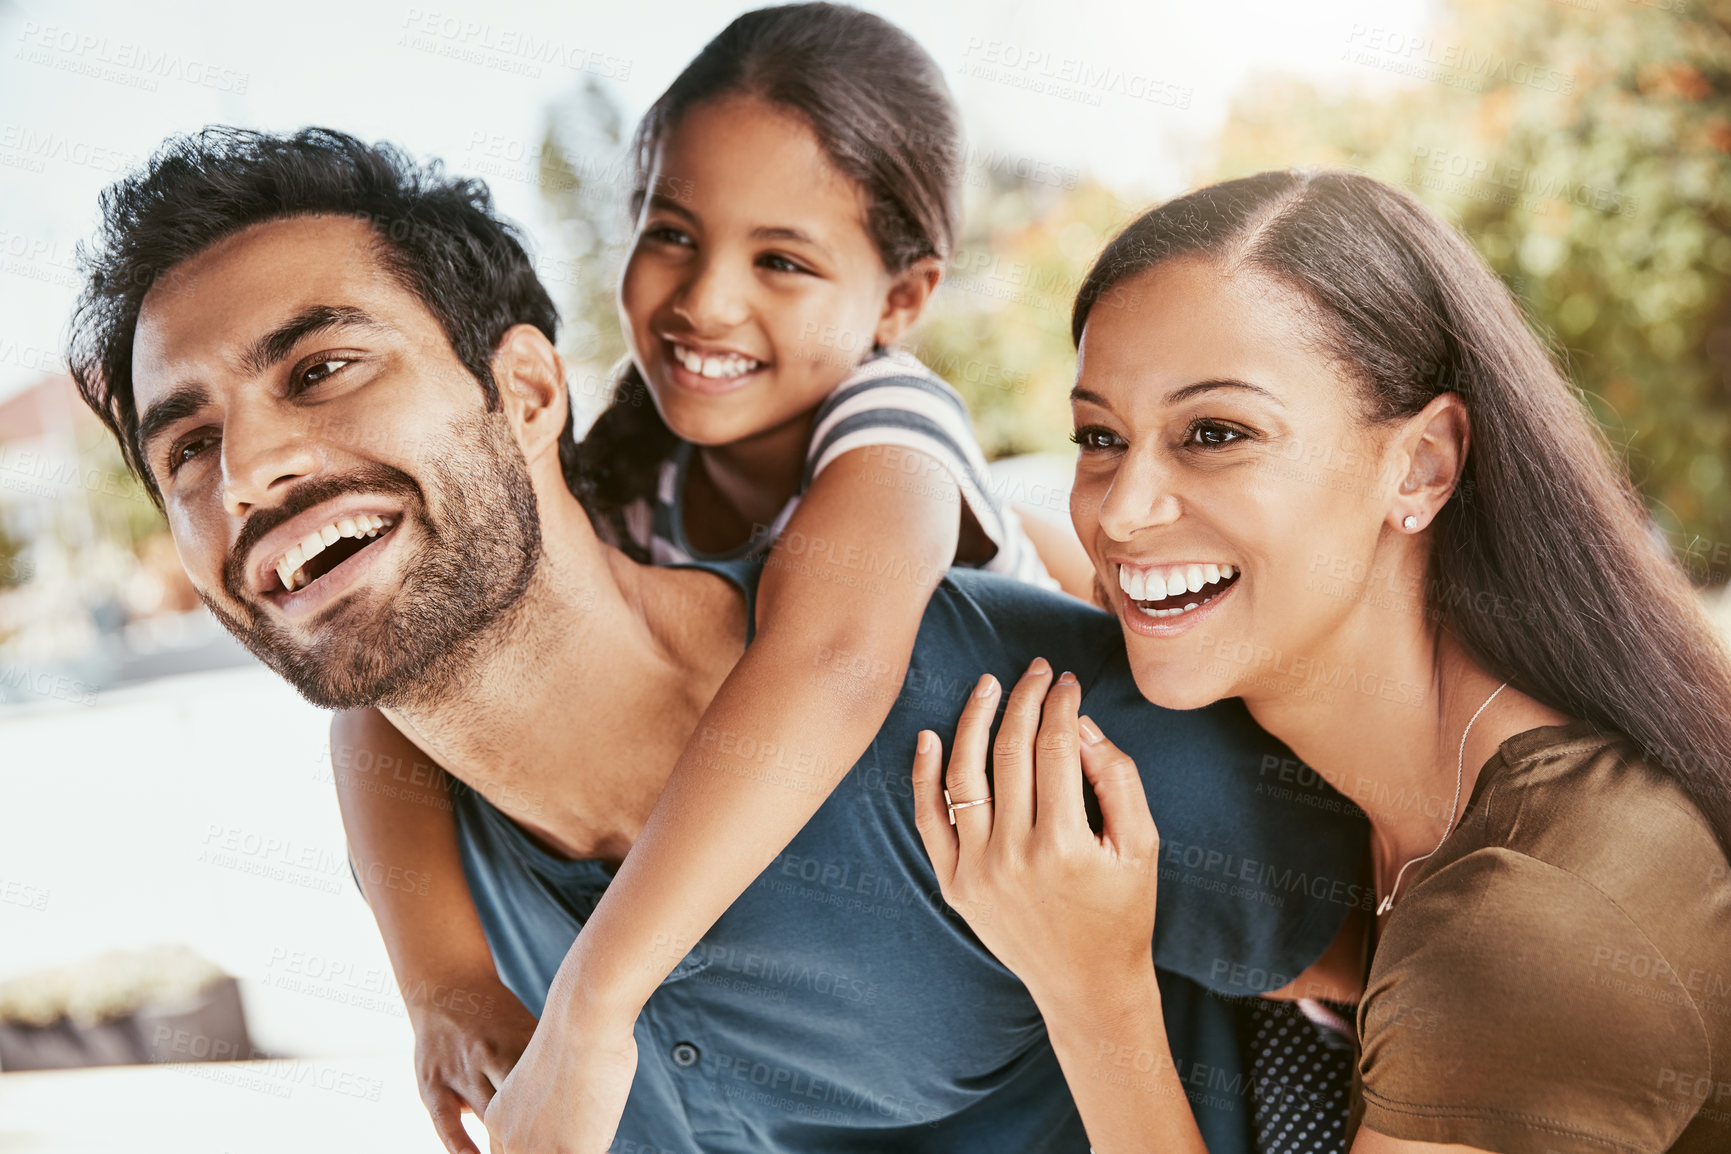 Buy stock photo Shot of a young family of three spending some quality time together